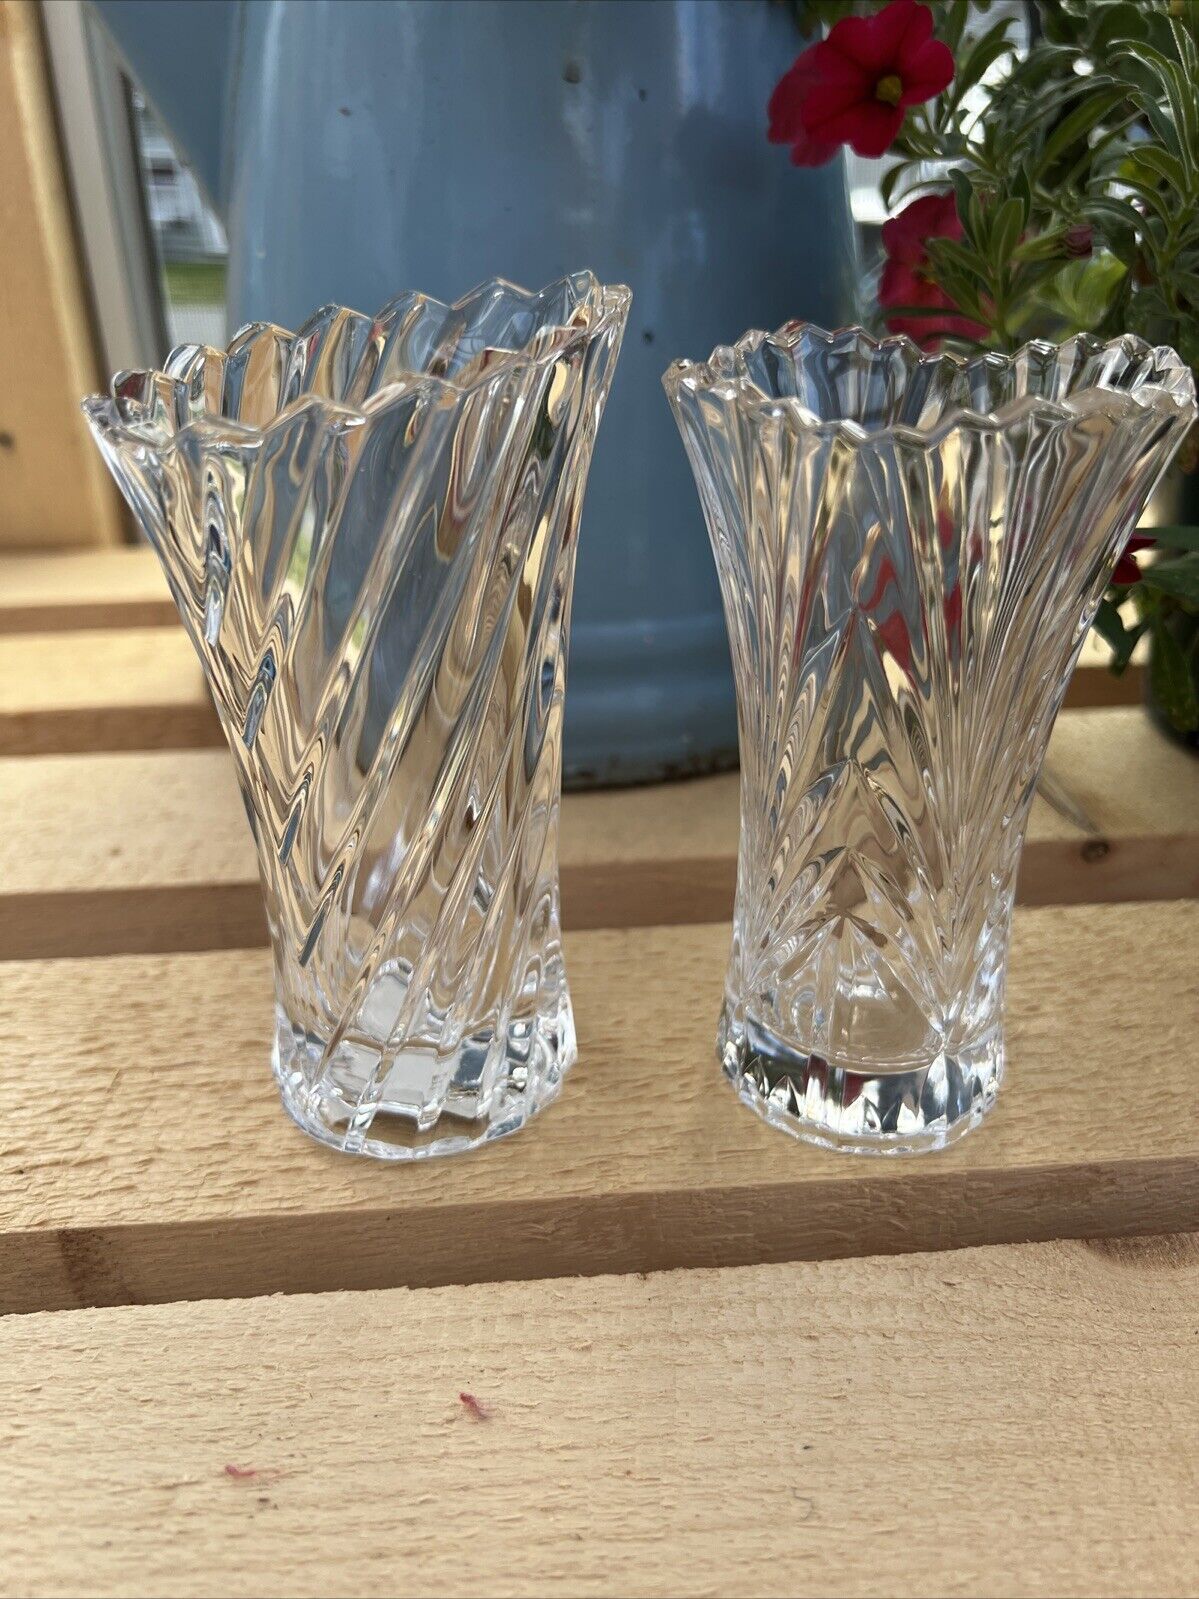 2 Mikasa Japan Vision Accent 5” Clear Crystal Bud Vases